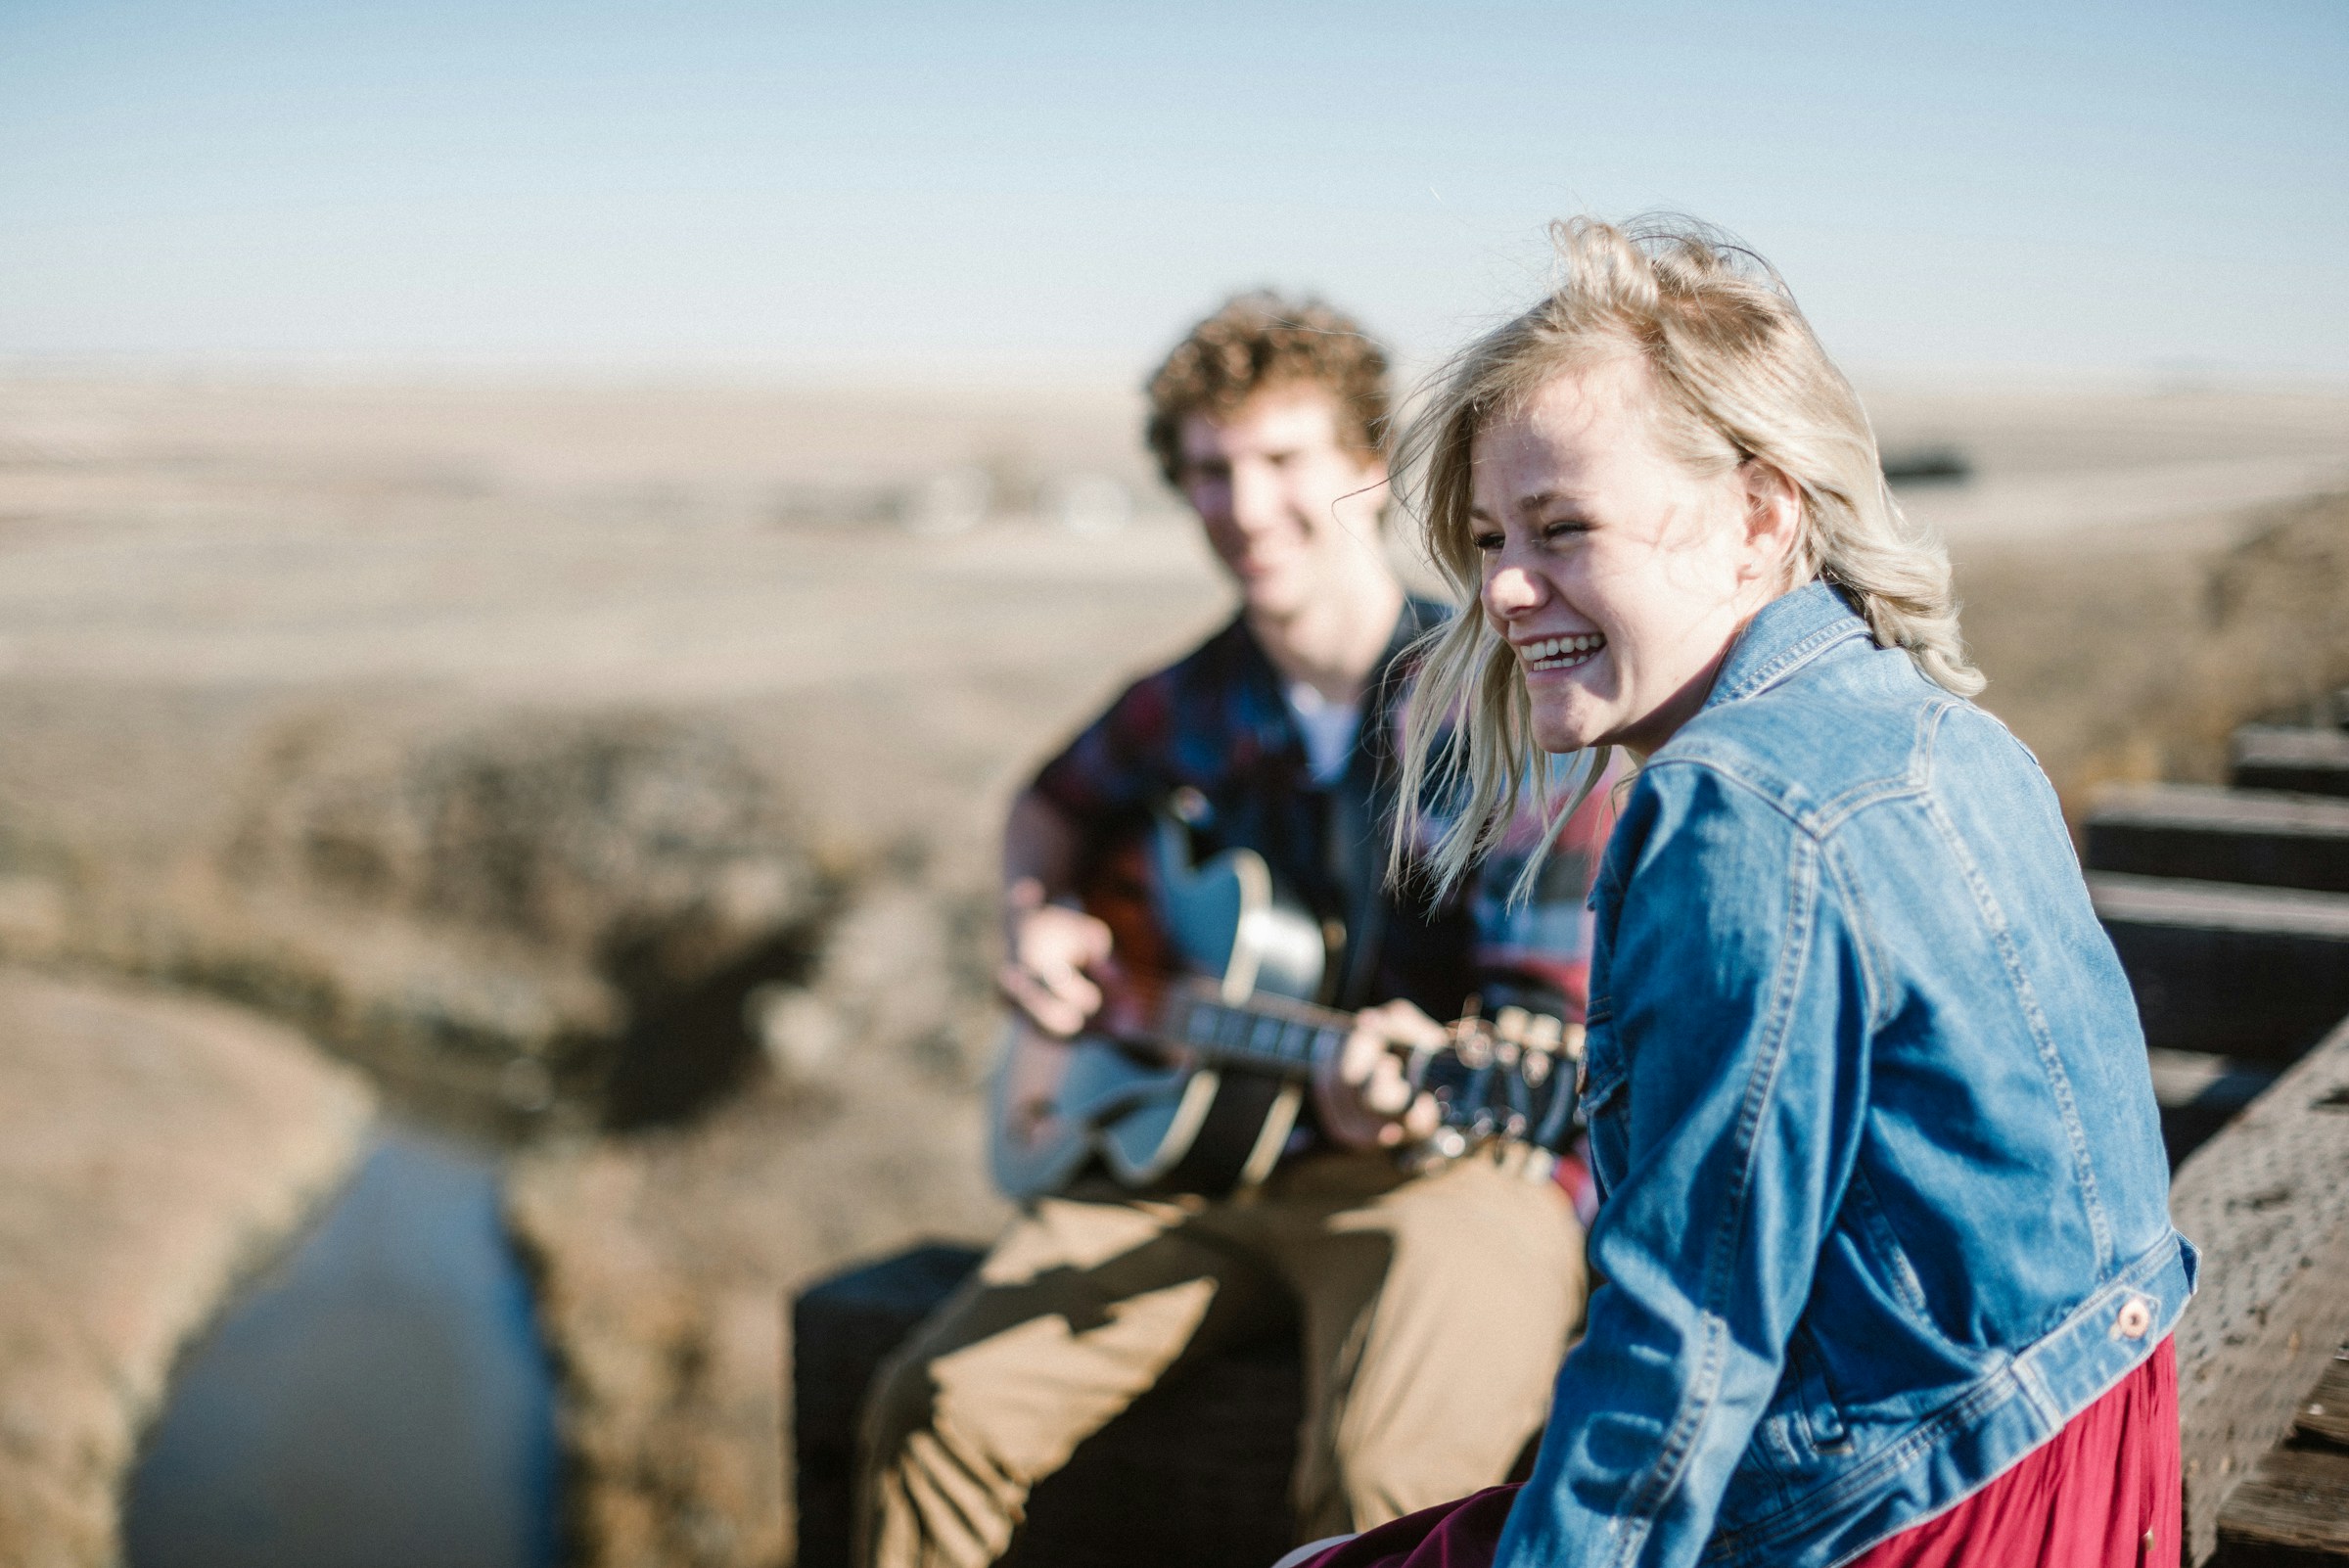 A woman smiling while sitting next to a man playing a guitar | Source: Unsplash